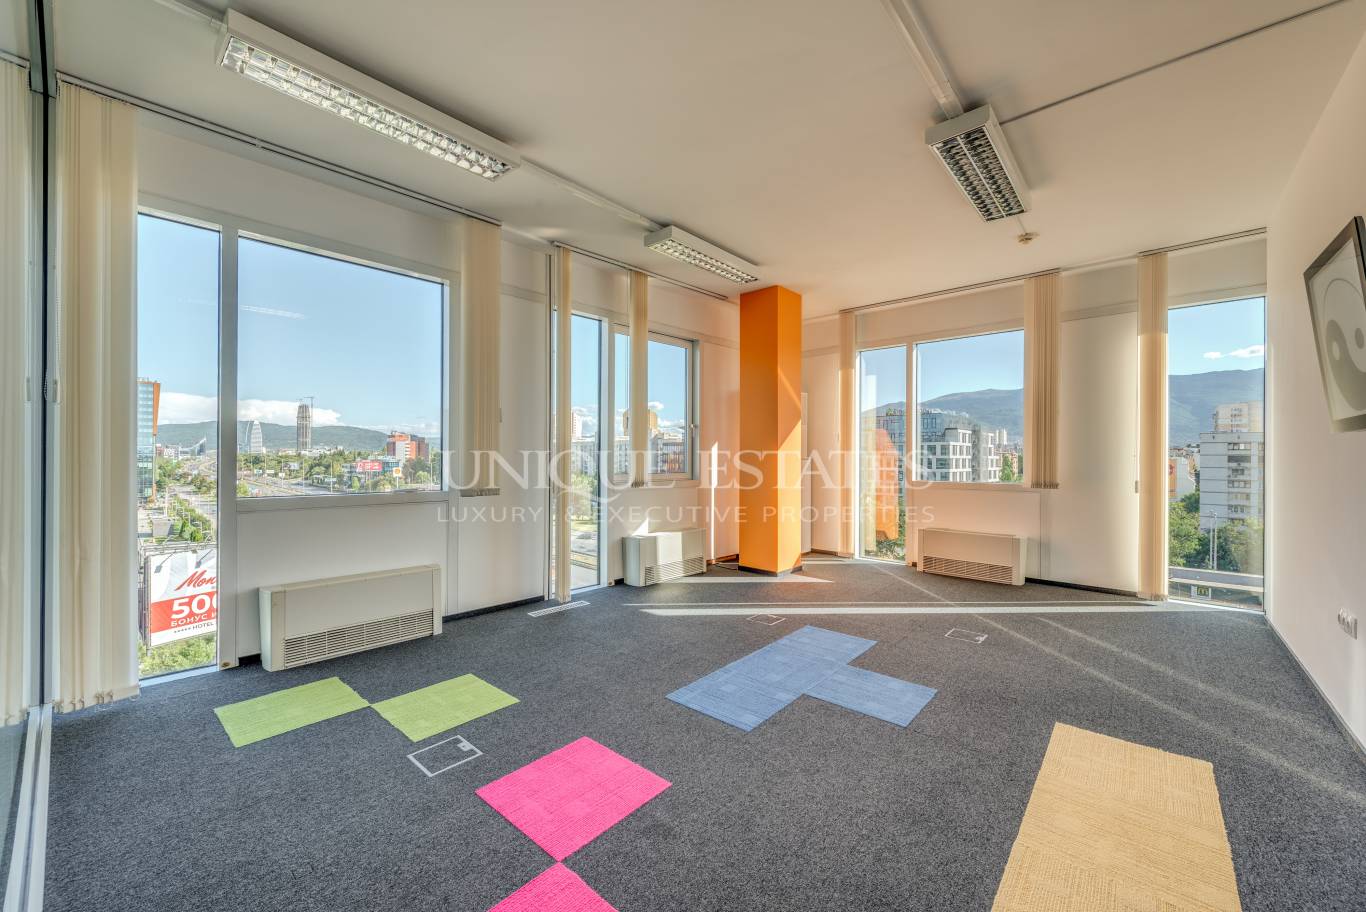 Office for rent in Sofia,  with listing ID: K15521 - image 11